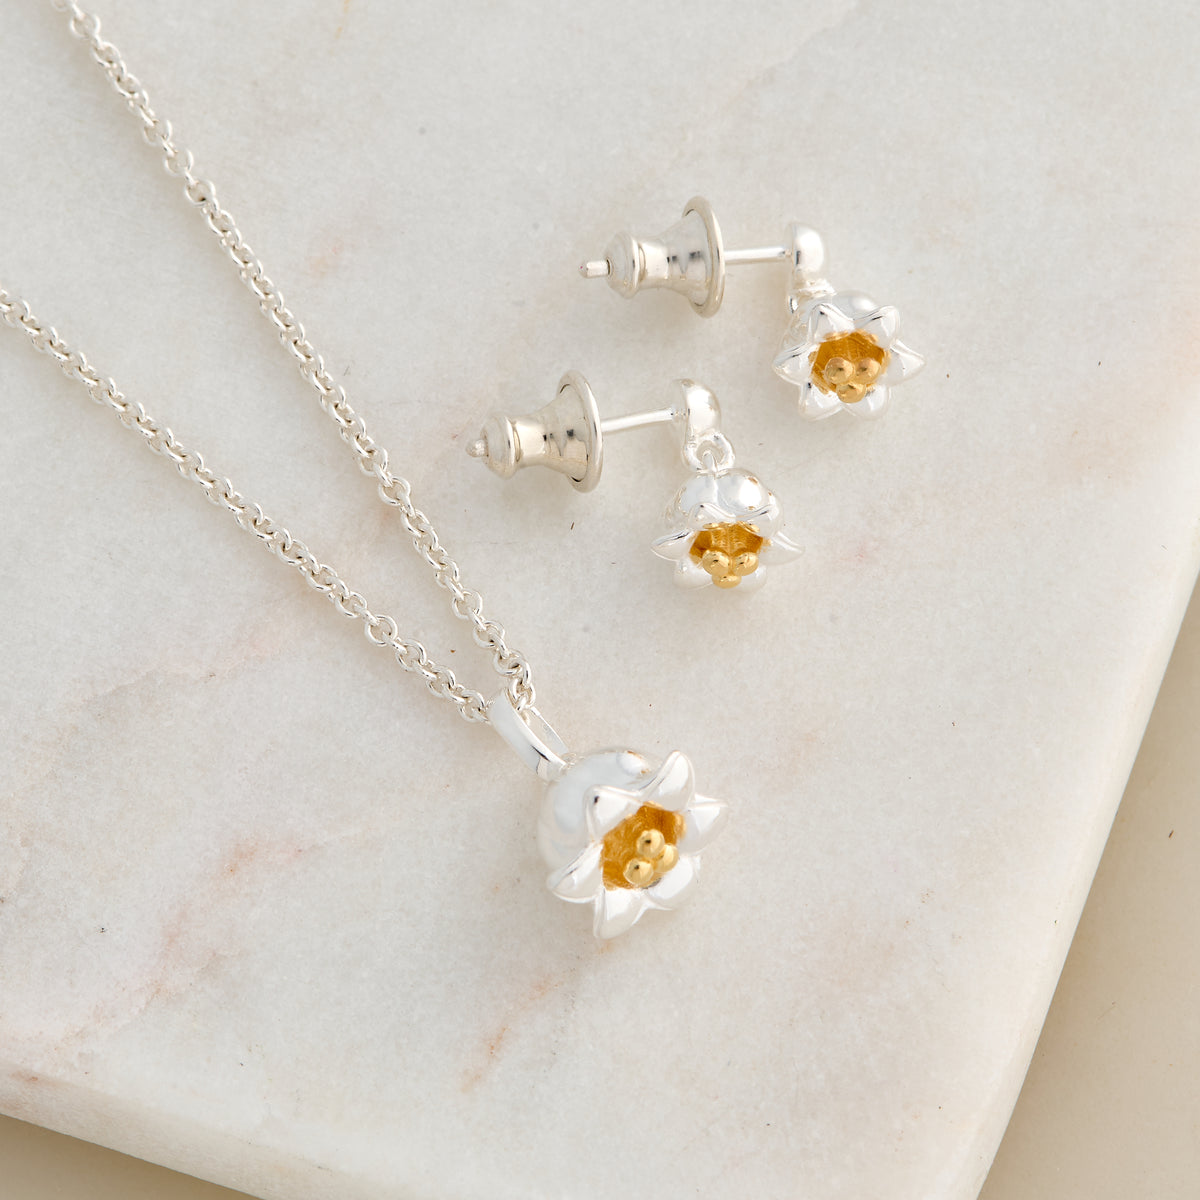 drop earrings lily of the valley silver and gold vermeil with matching necklace